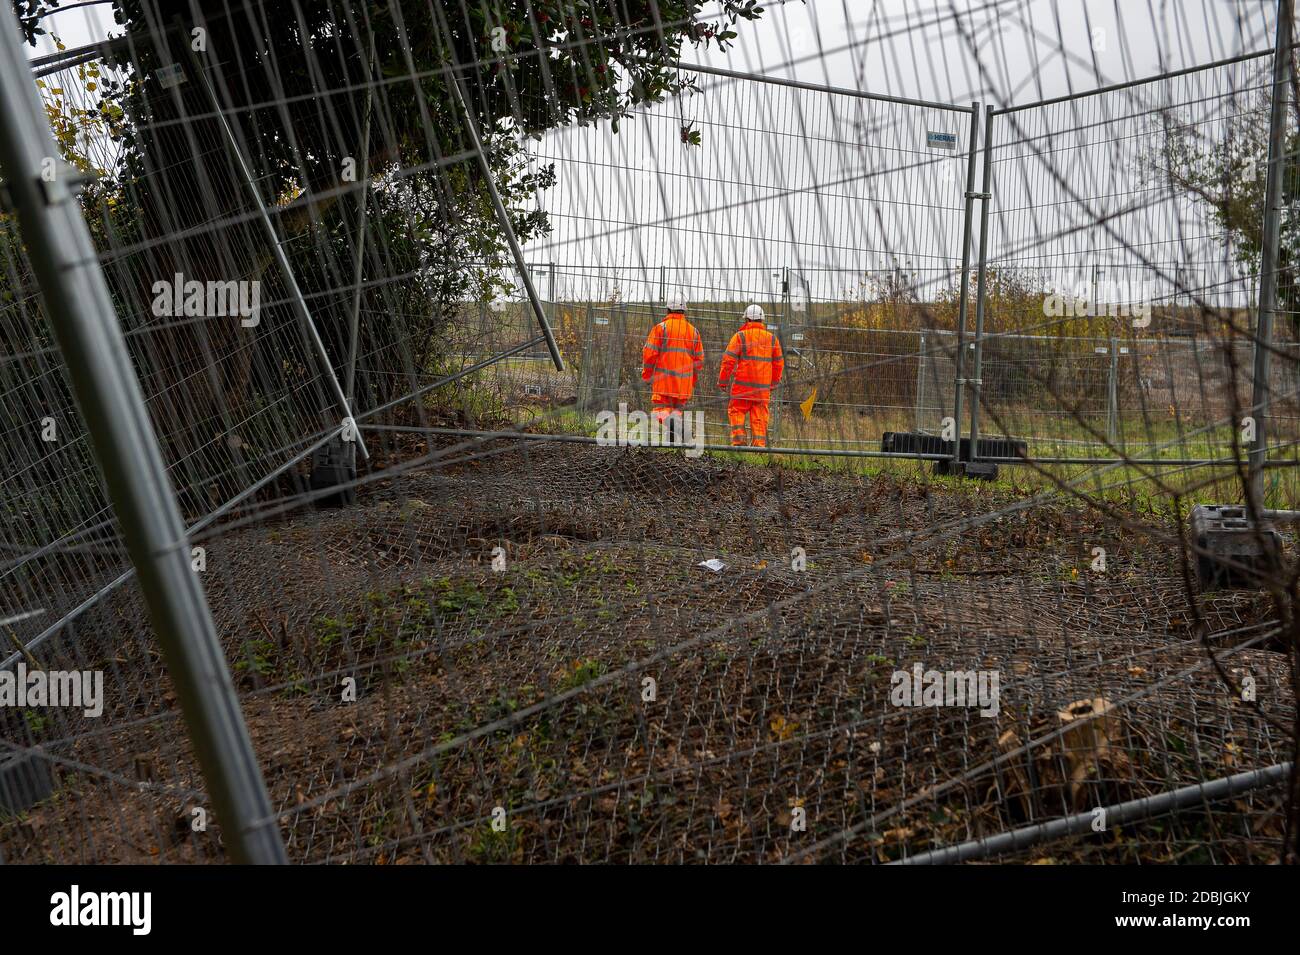 Aylesbury Vale, Buckinghamshire, UK. 17th November, 2020. HS2 security guards patrol  badger setts near Jones Hill Wood that HS2 Ltd have fenced over and put one way doors on them so that badgers inside can leave but never return. Badgers use the same setts for many generations and now many badgers will have to find new homes and risk being run over on nearby main roads. The controversial and over budget HS2 High Speed Rail puts 108 ancient woodlands, 33 SSSIs and 693 wildlife sites at risk. Environmental campaigners are calling for the destructive scheme to be cancelled. Credit: Maureen McLea Stock Photo